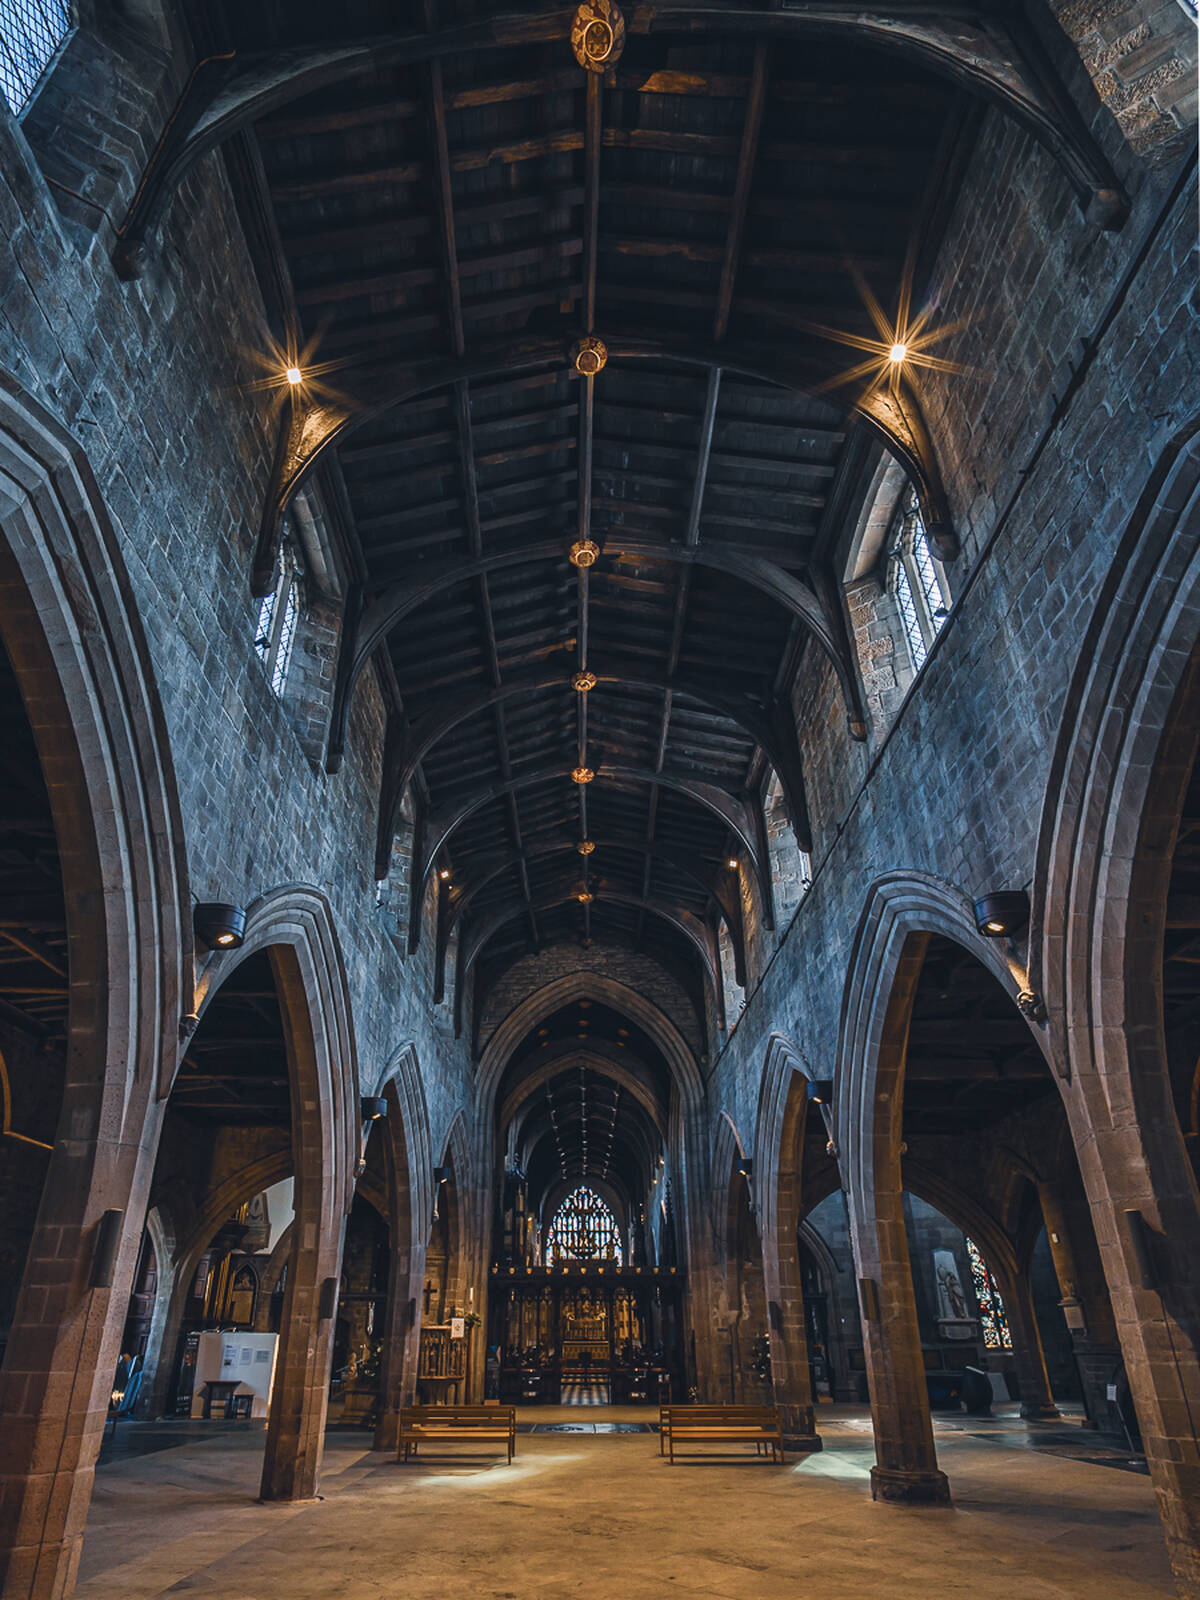 Image of Newcastle Cathedral by James Billings.